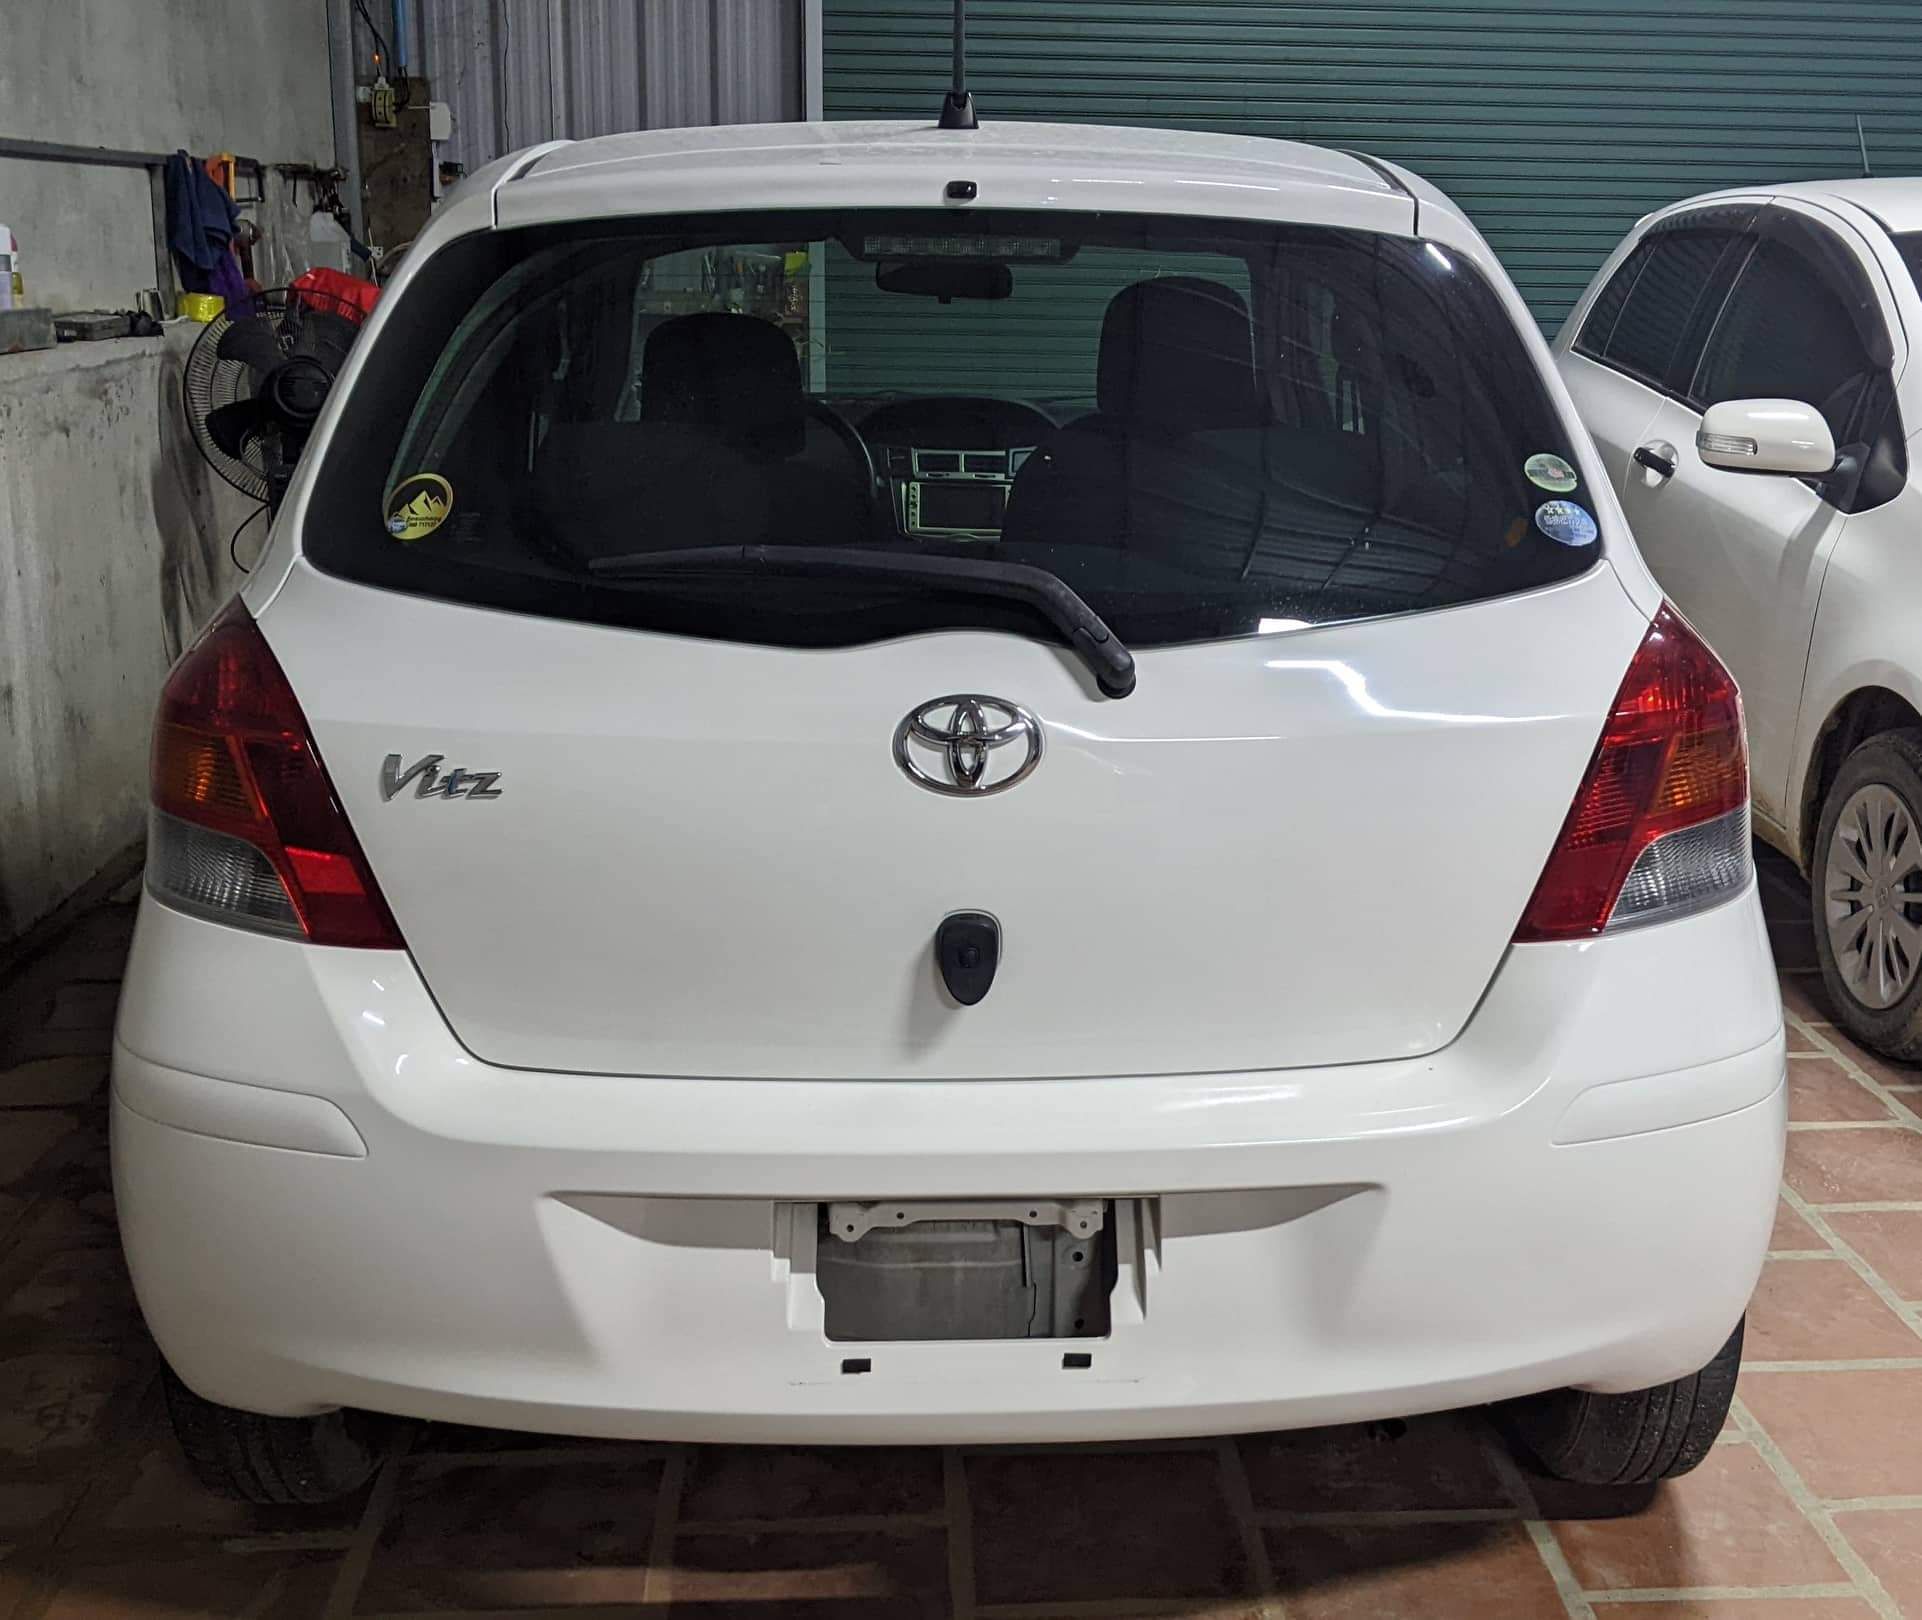 Toyota vitz 2009 new beautiful can come and see